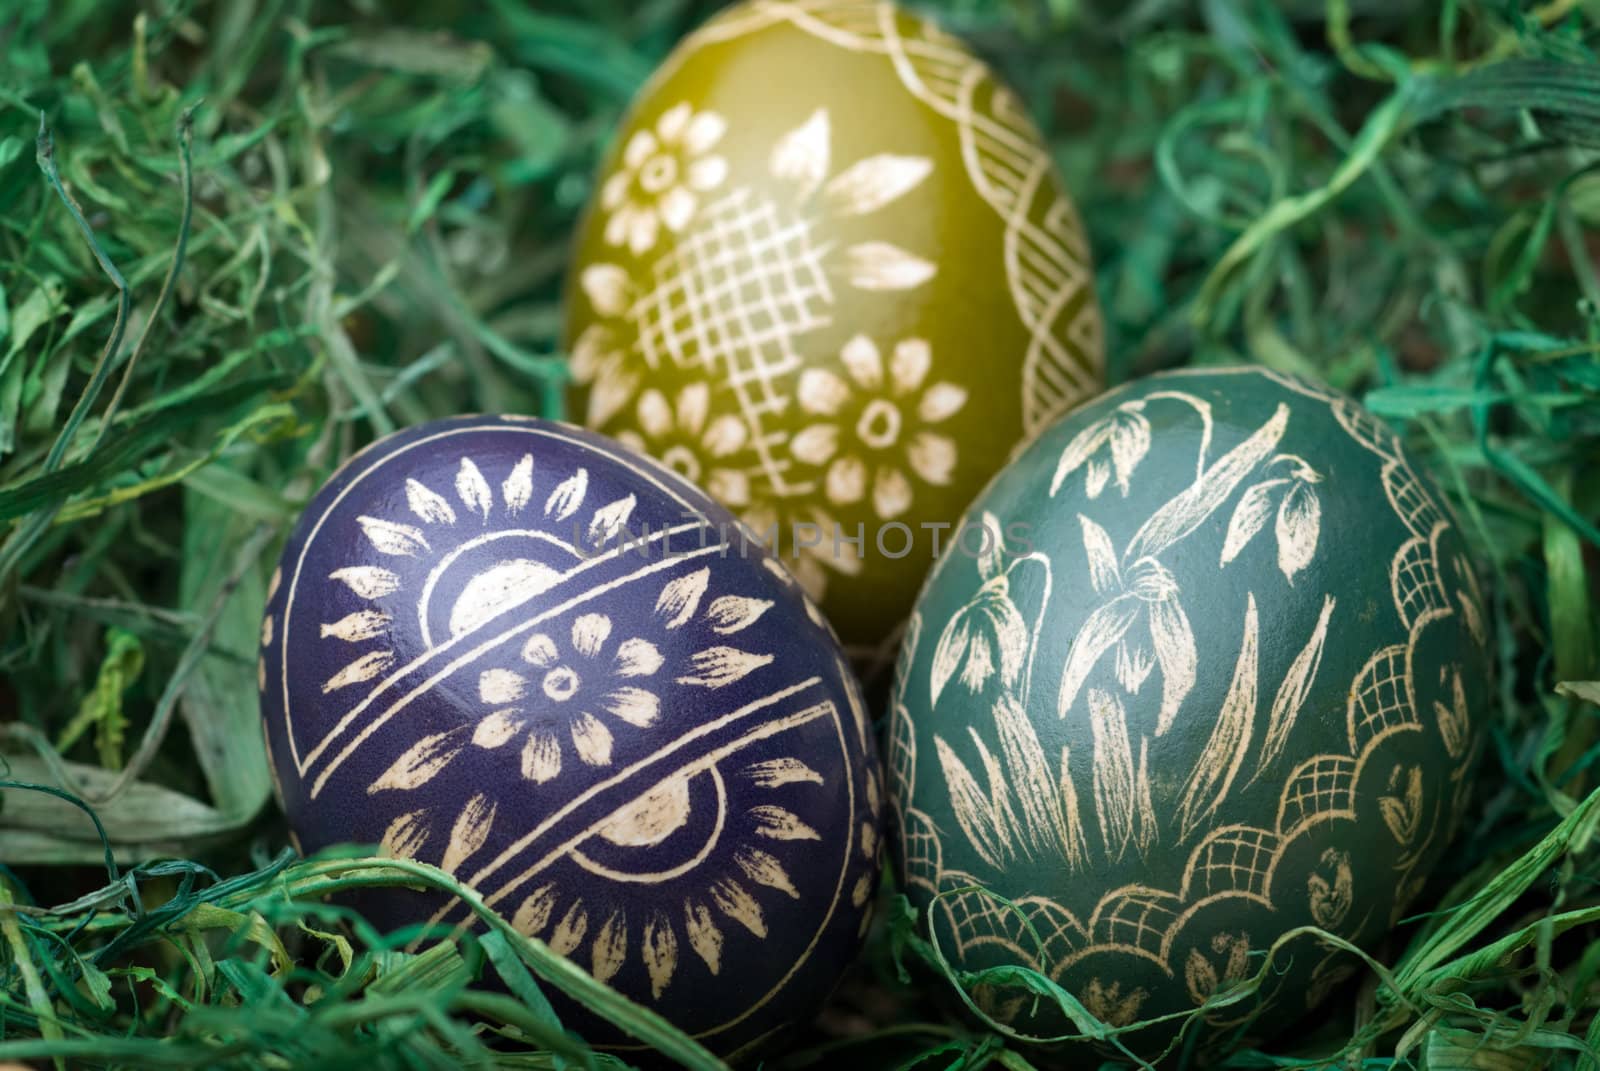 Three handmade easter eggs on the green hay. Selective focus, shallow depth of field.